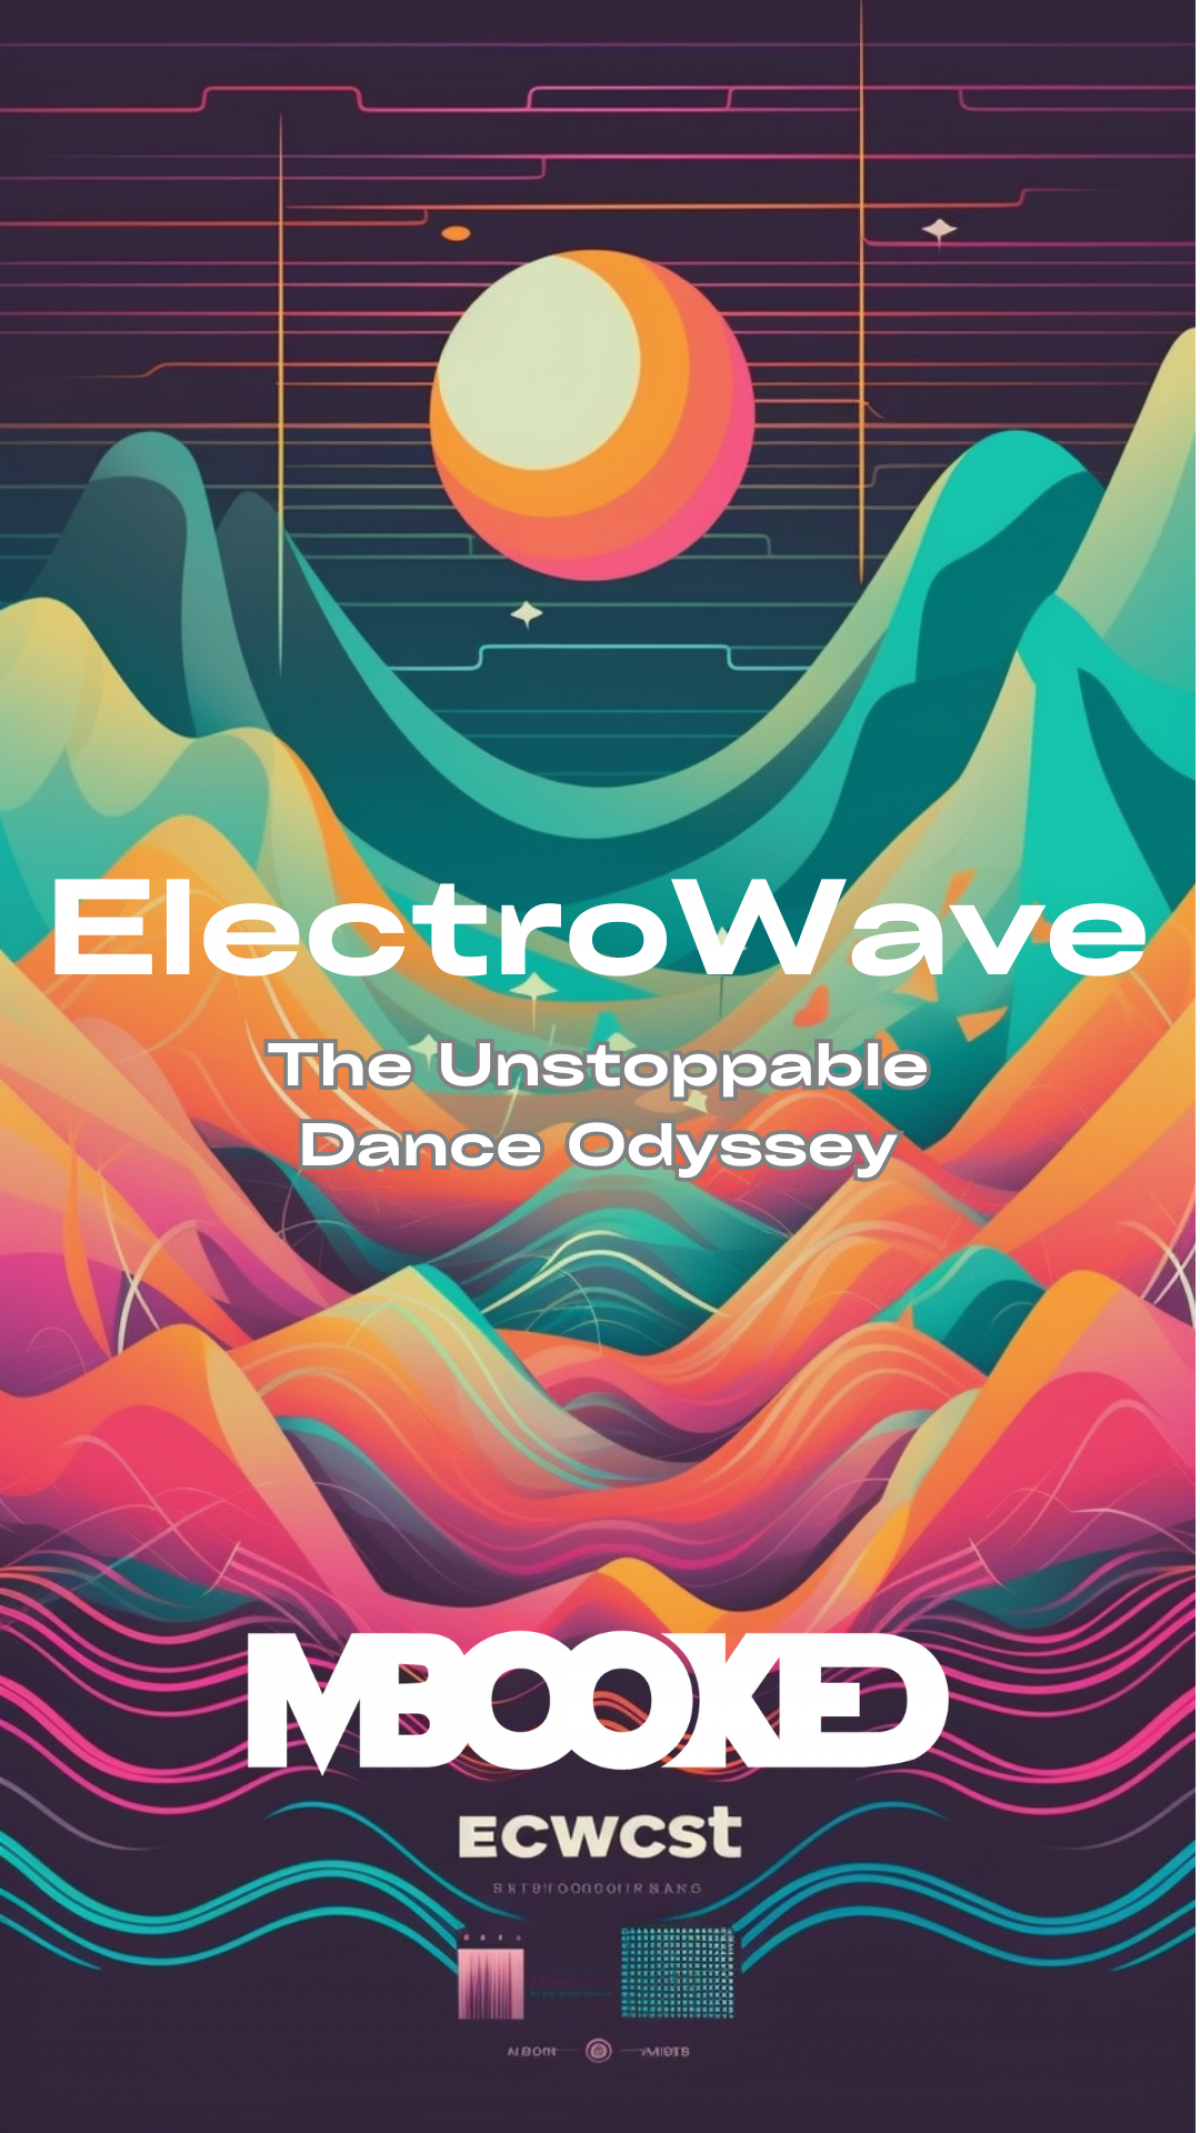 mBooked.com, ElectroWave: The Unstoppable Dance Odyssey, Dublin, Demo Account